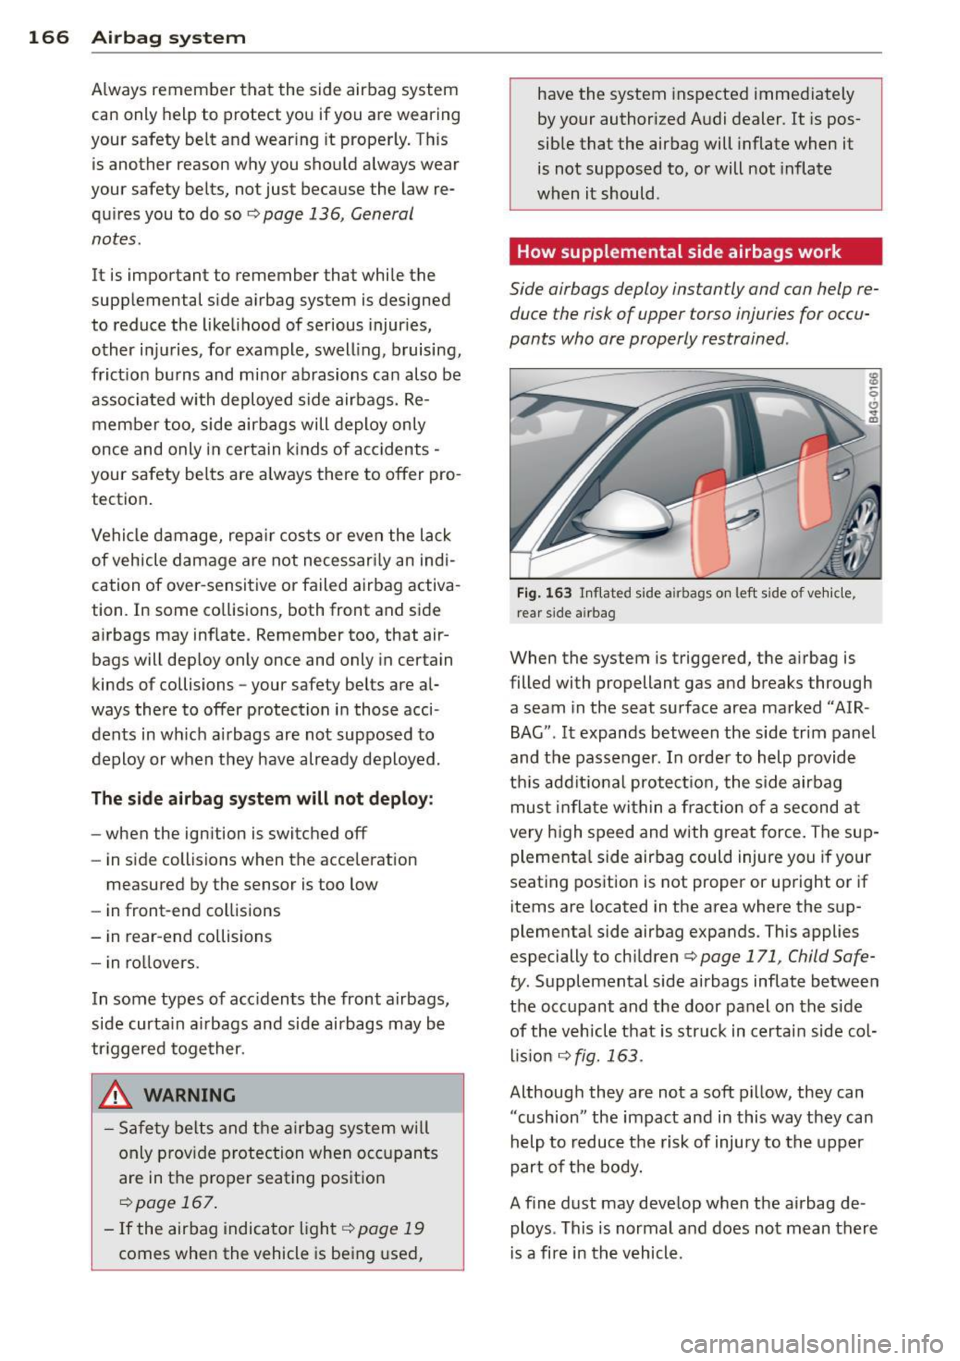 AUDI A6 2013  Owners Manual 166  Airbag system 
Always  remember  that  the  side  airbag  system 
can  only  help  to protect  you  if you  are  wearing 
your  safety  belt  and  wear ing  it  properly.  This 
is  another  reas